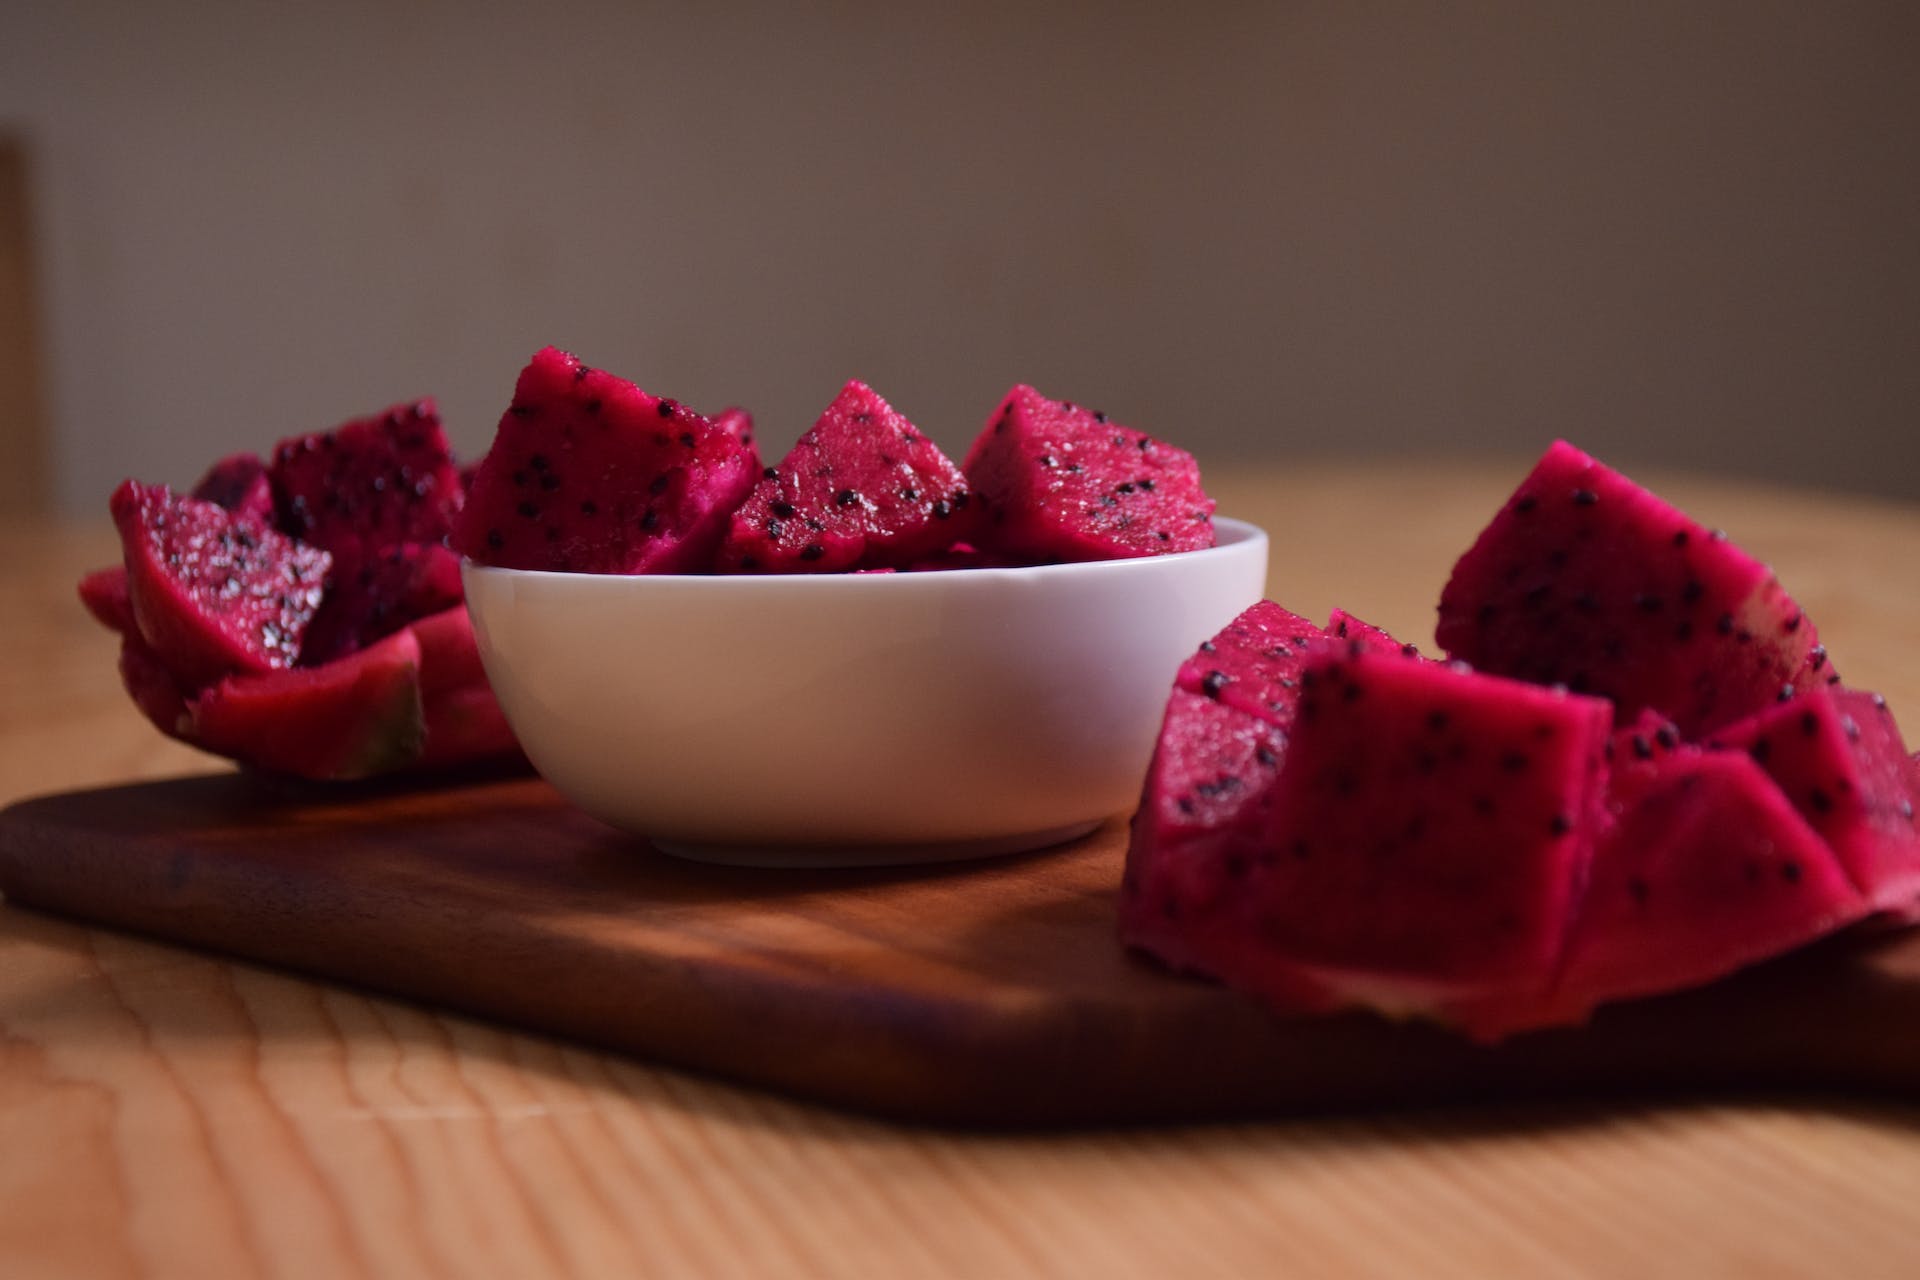 A bowl of red dragon fruit